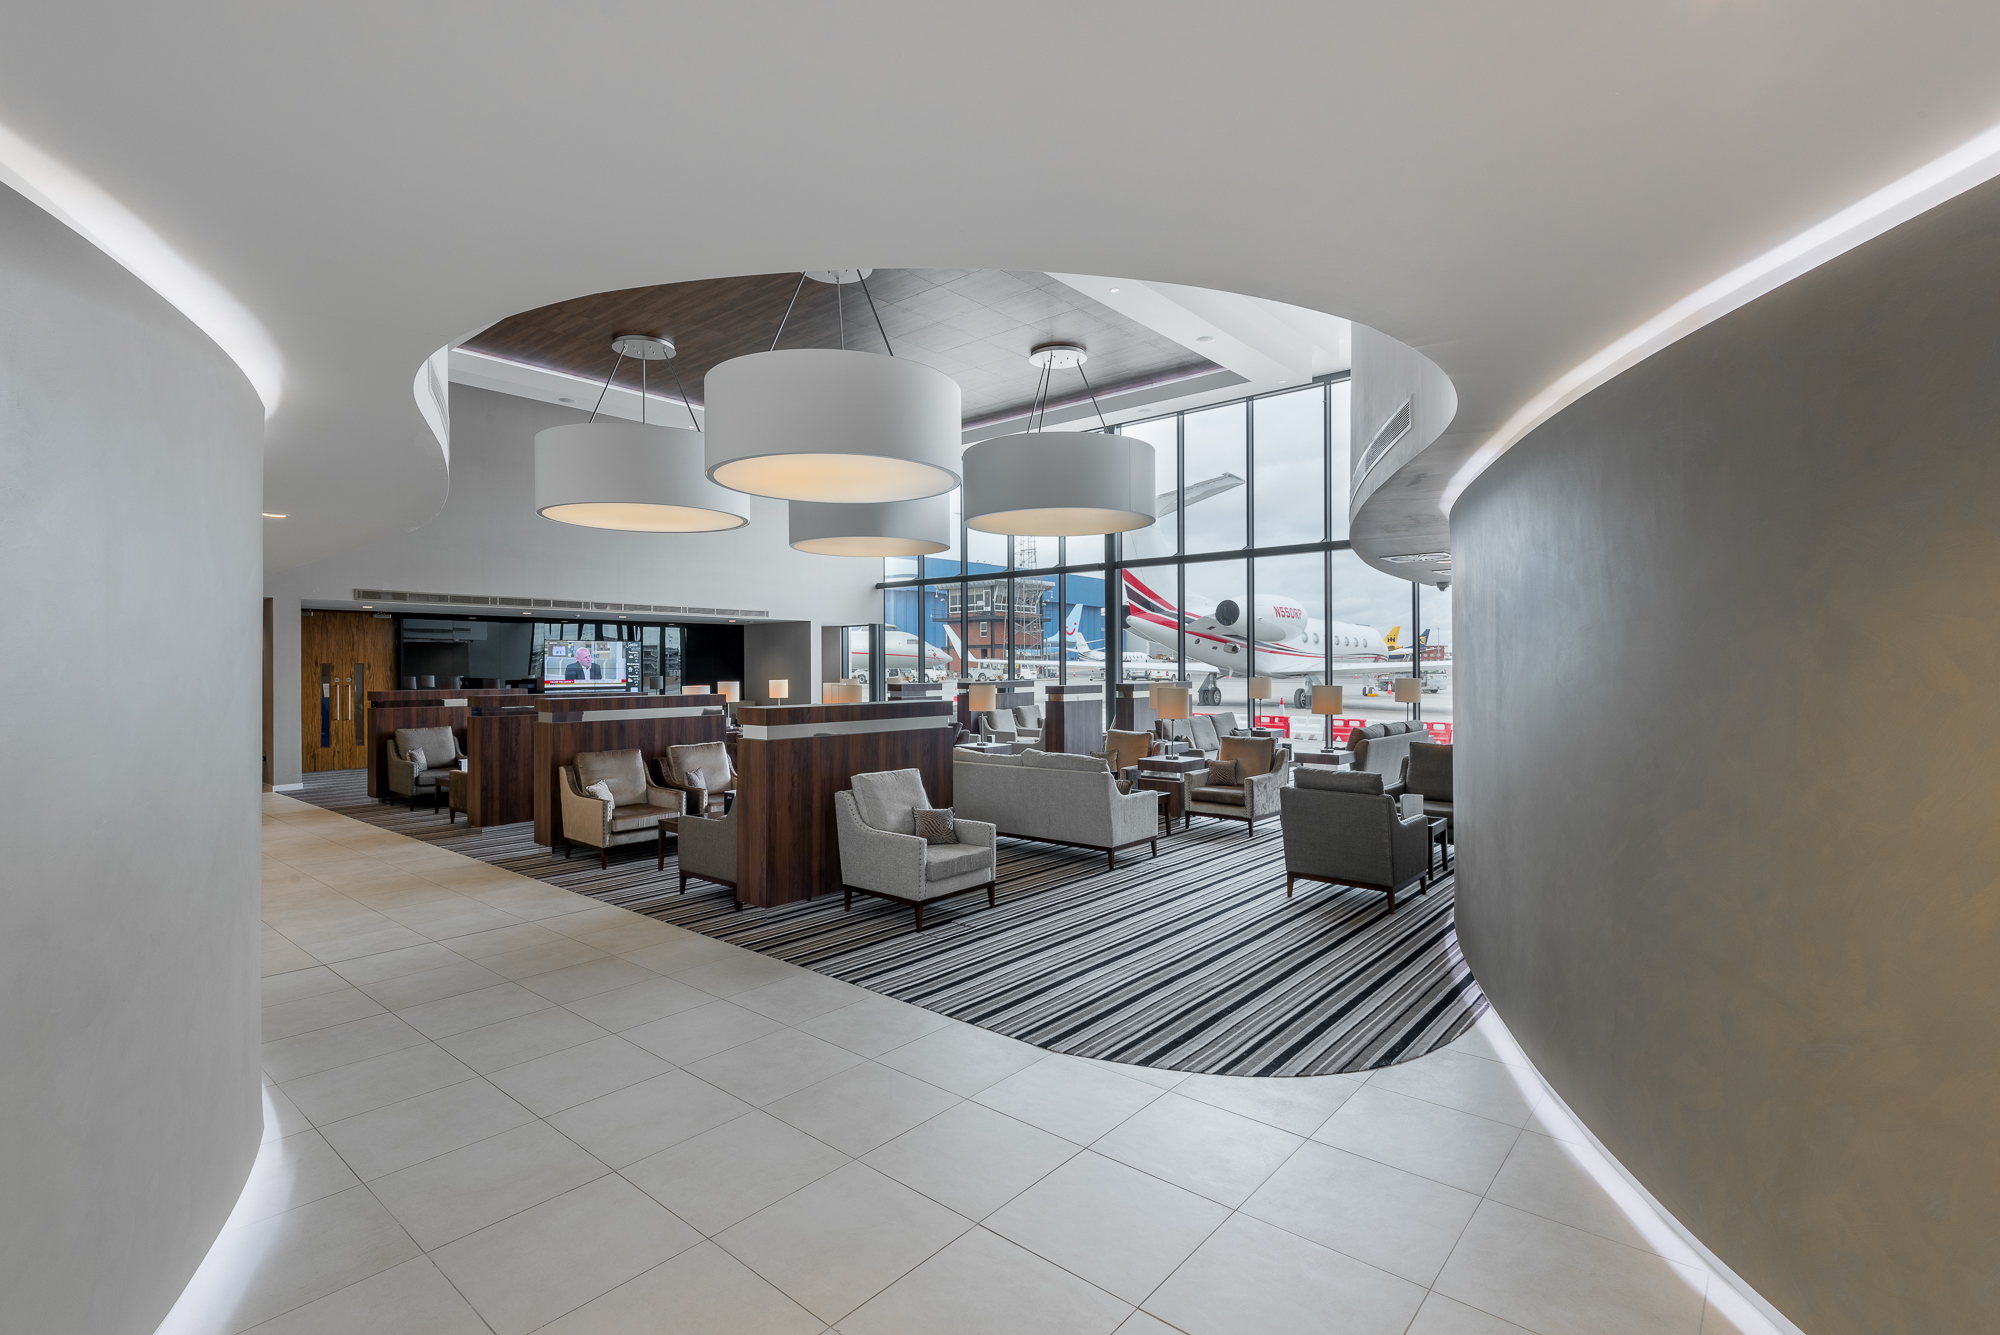 Commercial-interior-photography-luton-airport-9.jpg